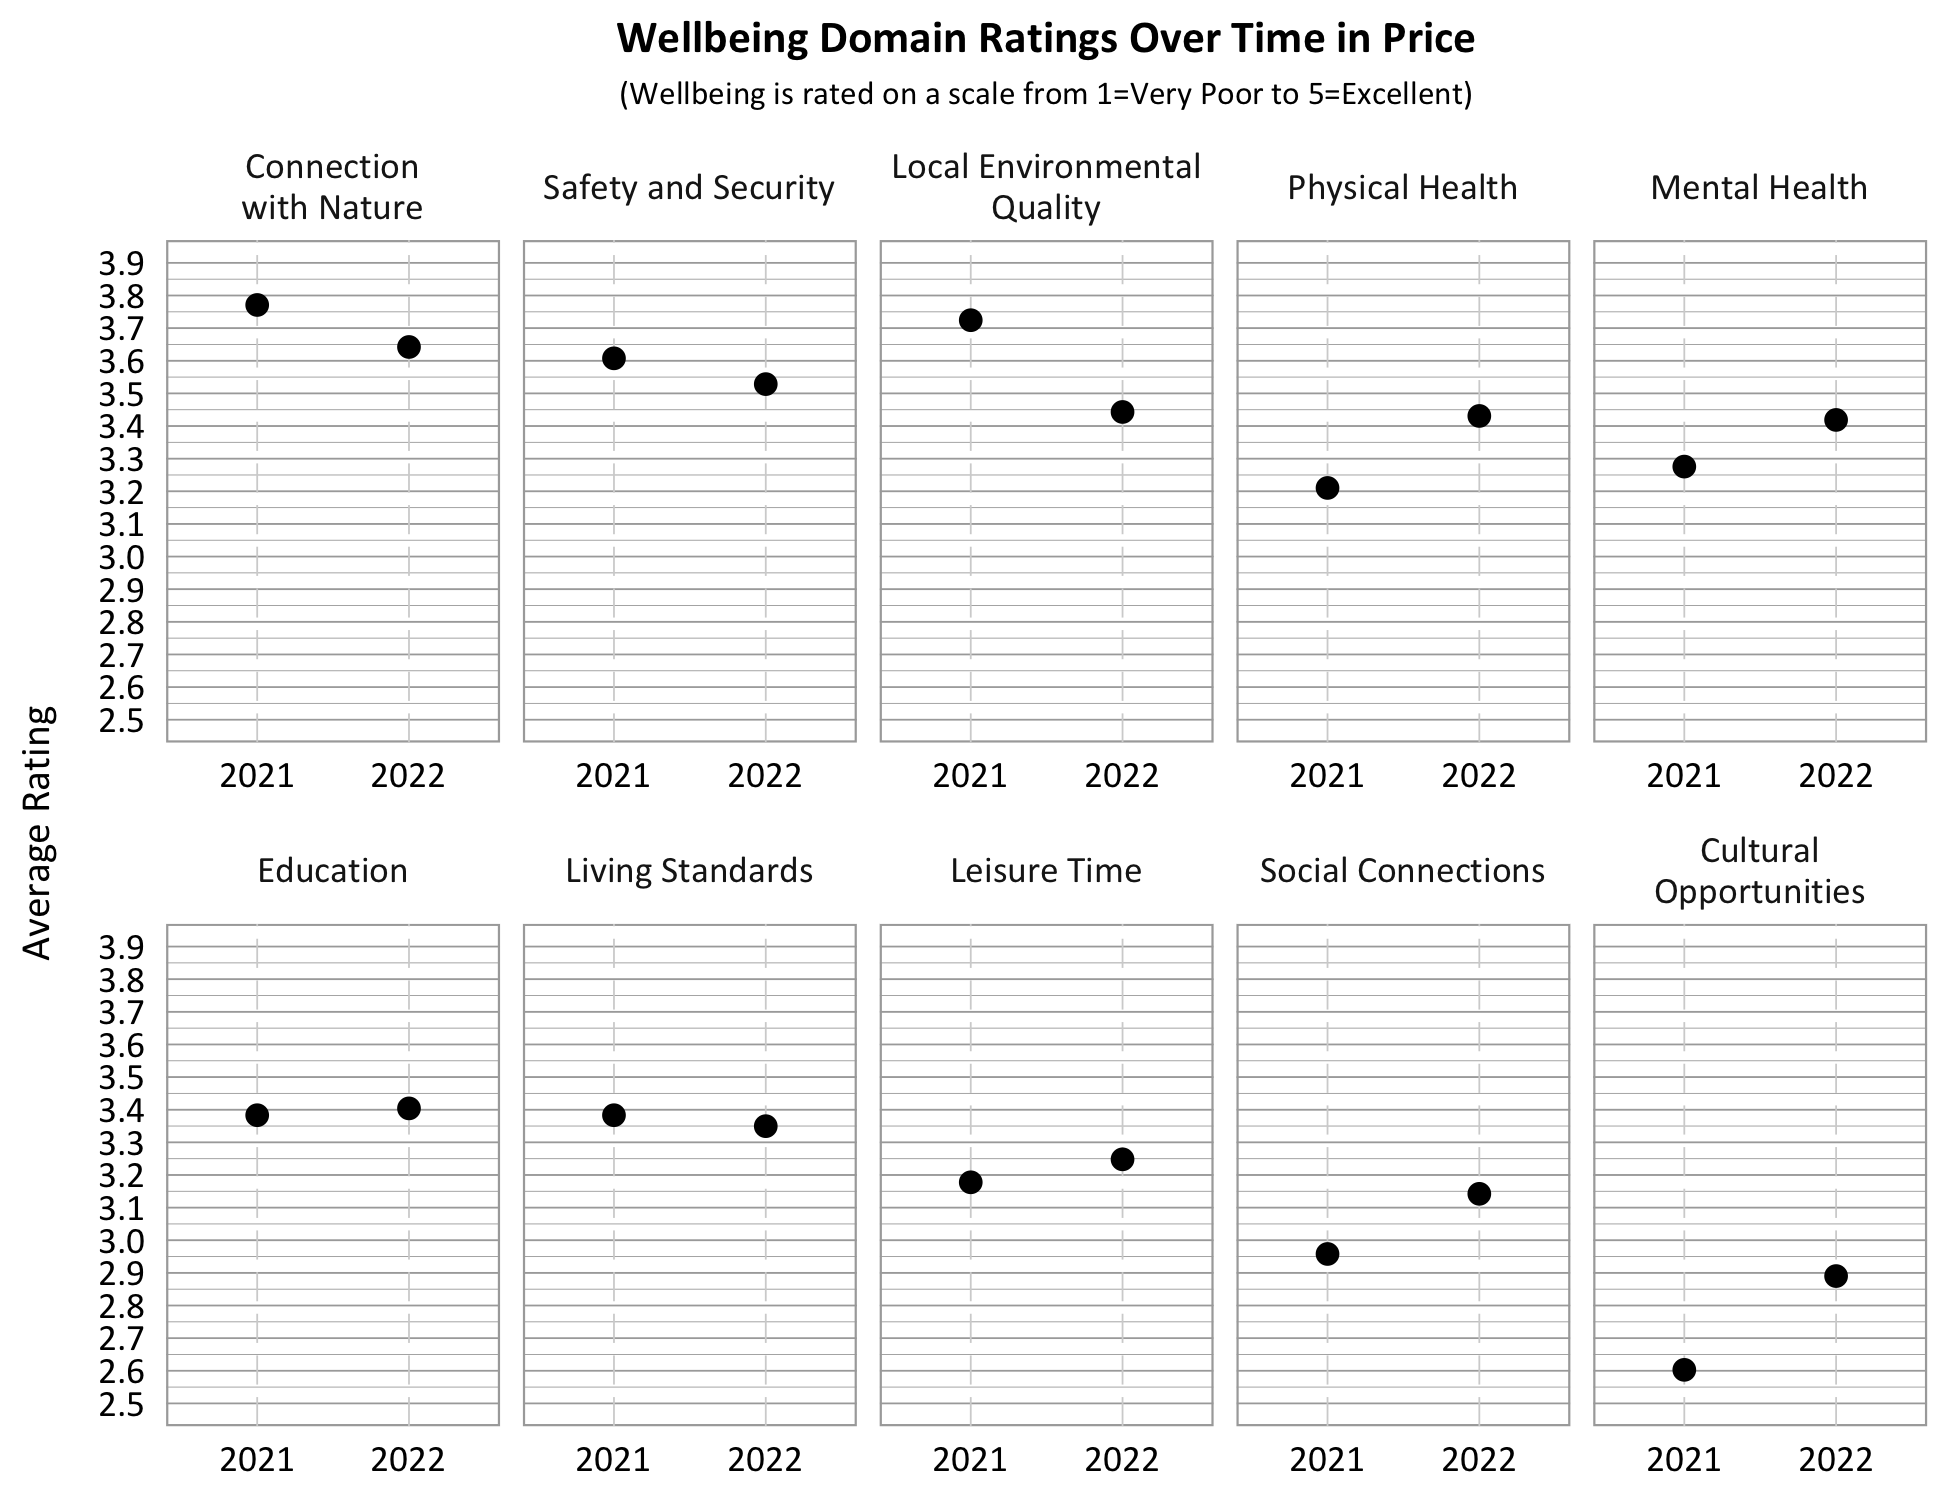 Dot Plot. Title: Wellbeing Domain Ratings Over Time in Price, Subtitle: Wellbeing is rated on a scale from 1=Very Poor to 5=Excellent. Category: Living Standards- 2021- 3.4, 2022- 3.35; Category: Safety and Security- 2021- 3.6, 2022- 3.5; Category: Connection with Nature- 2021- 3.8, 2022- 3.65, Category: Education- 2021- 3.4, 2022- 3.4; Category: Physical Health: 2021- 3.2; 2022 3.4; Category: Mental Health- 2021- 3.3, 2022- 3.4; Category: Local Environmental Quality- 2021- 3.7, 2022- 3.4; Category: Leisure Time- 2021- 3.2, 2022- 3.3, Category: Social Connections- 2021- 3.0; 2022- 3.1, Category: Cultural Opportunities- 2021- 2.6, 2022- 2.9. 